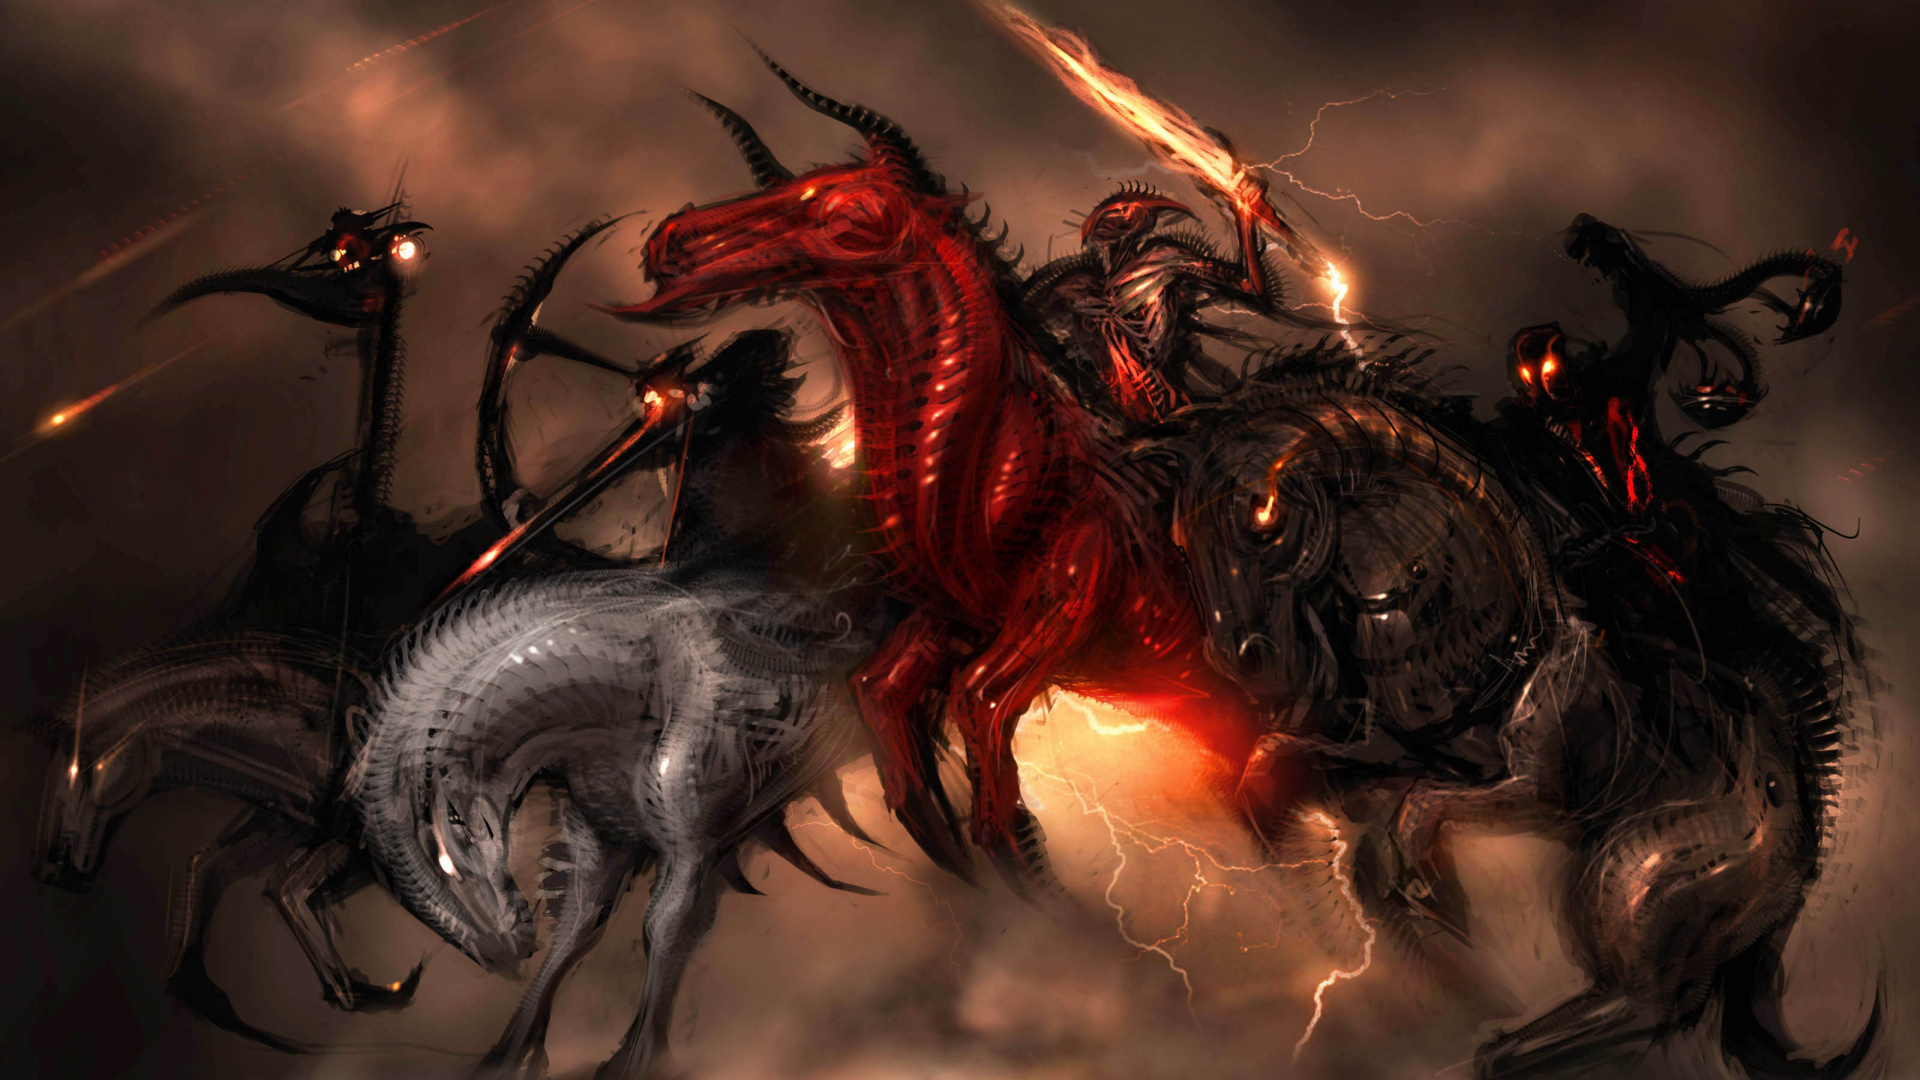 Red and Black Dragon Illustration. Wallpaper in 1920x1080 Resolution